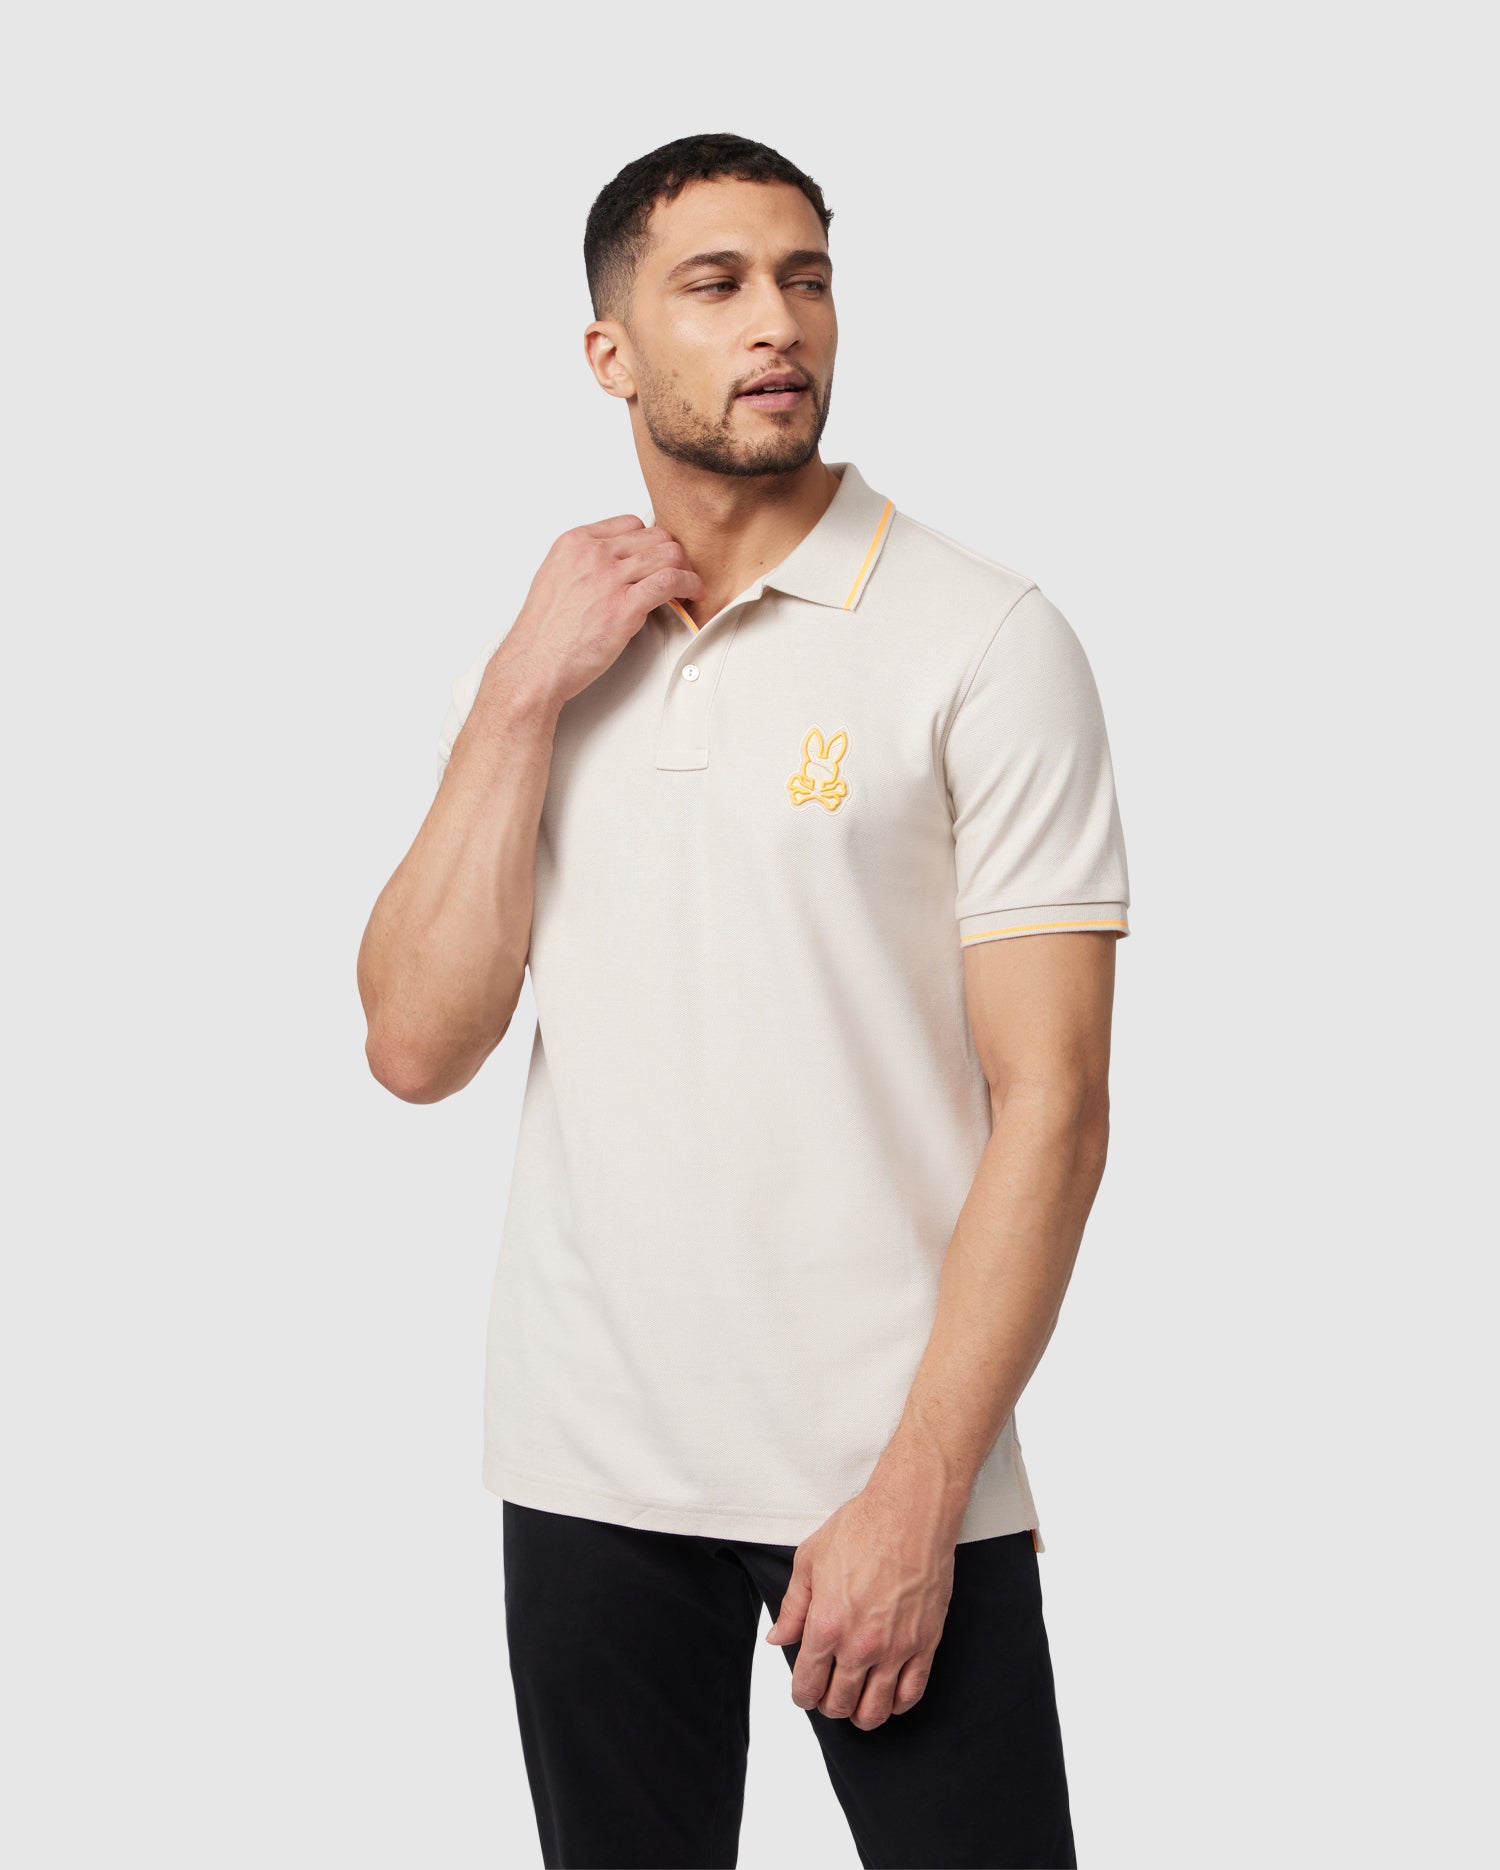 A man with short hair and a trimmed beard is posing in a light beige Pima cotton MENS LENOX PIQUE POLO SHIRT - B6K138B200 from Psycho Bunny with yellow contrasting tippings on the collar and sleeves. The shirt, complete with mother-of-pearl buttons, features an embroidered rabbit logo on the chest. He is touching his neck with his right hand and looking to his left.